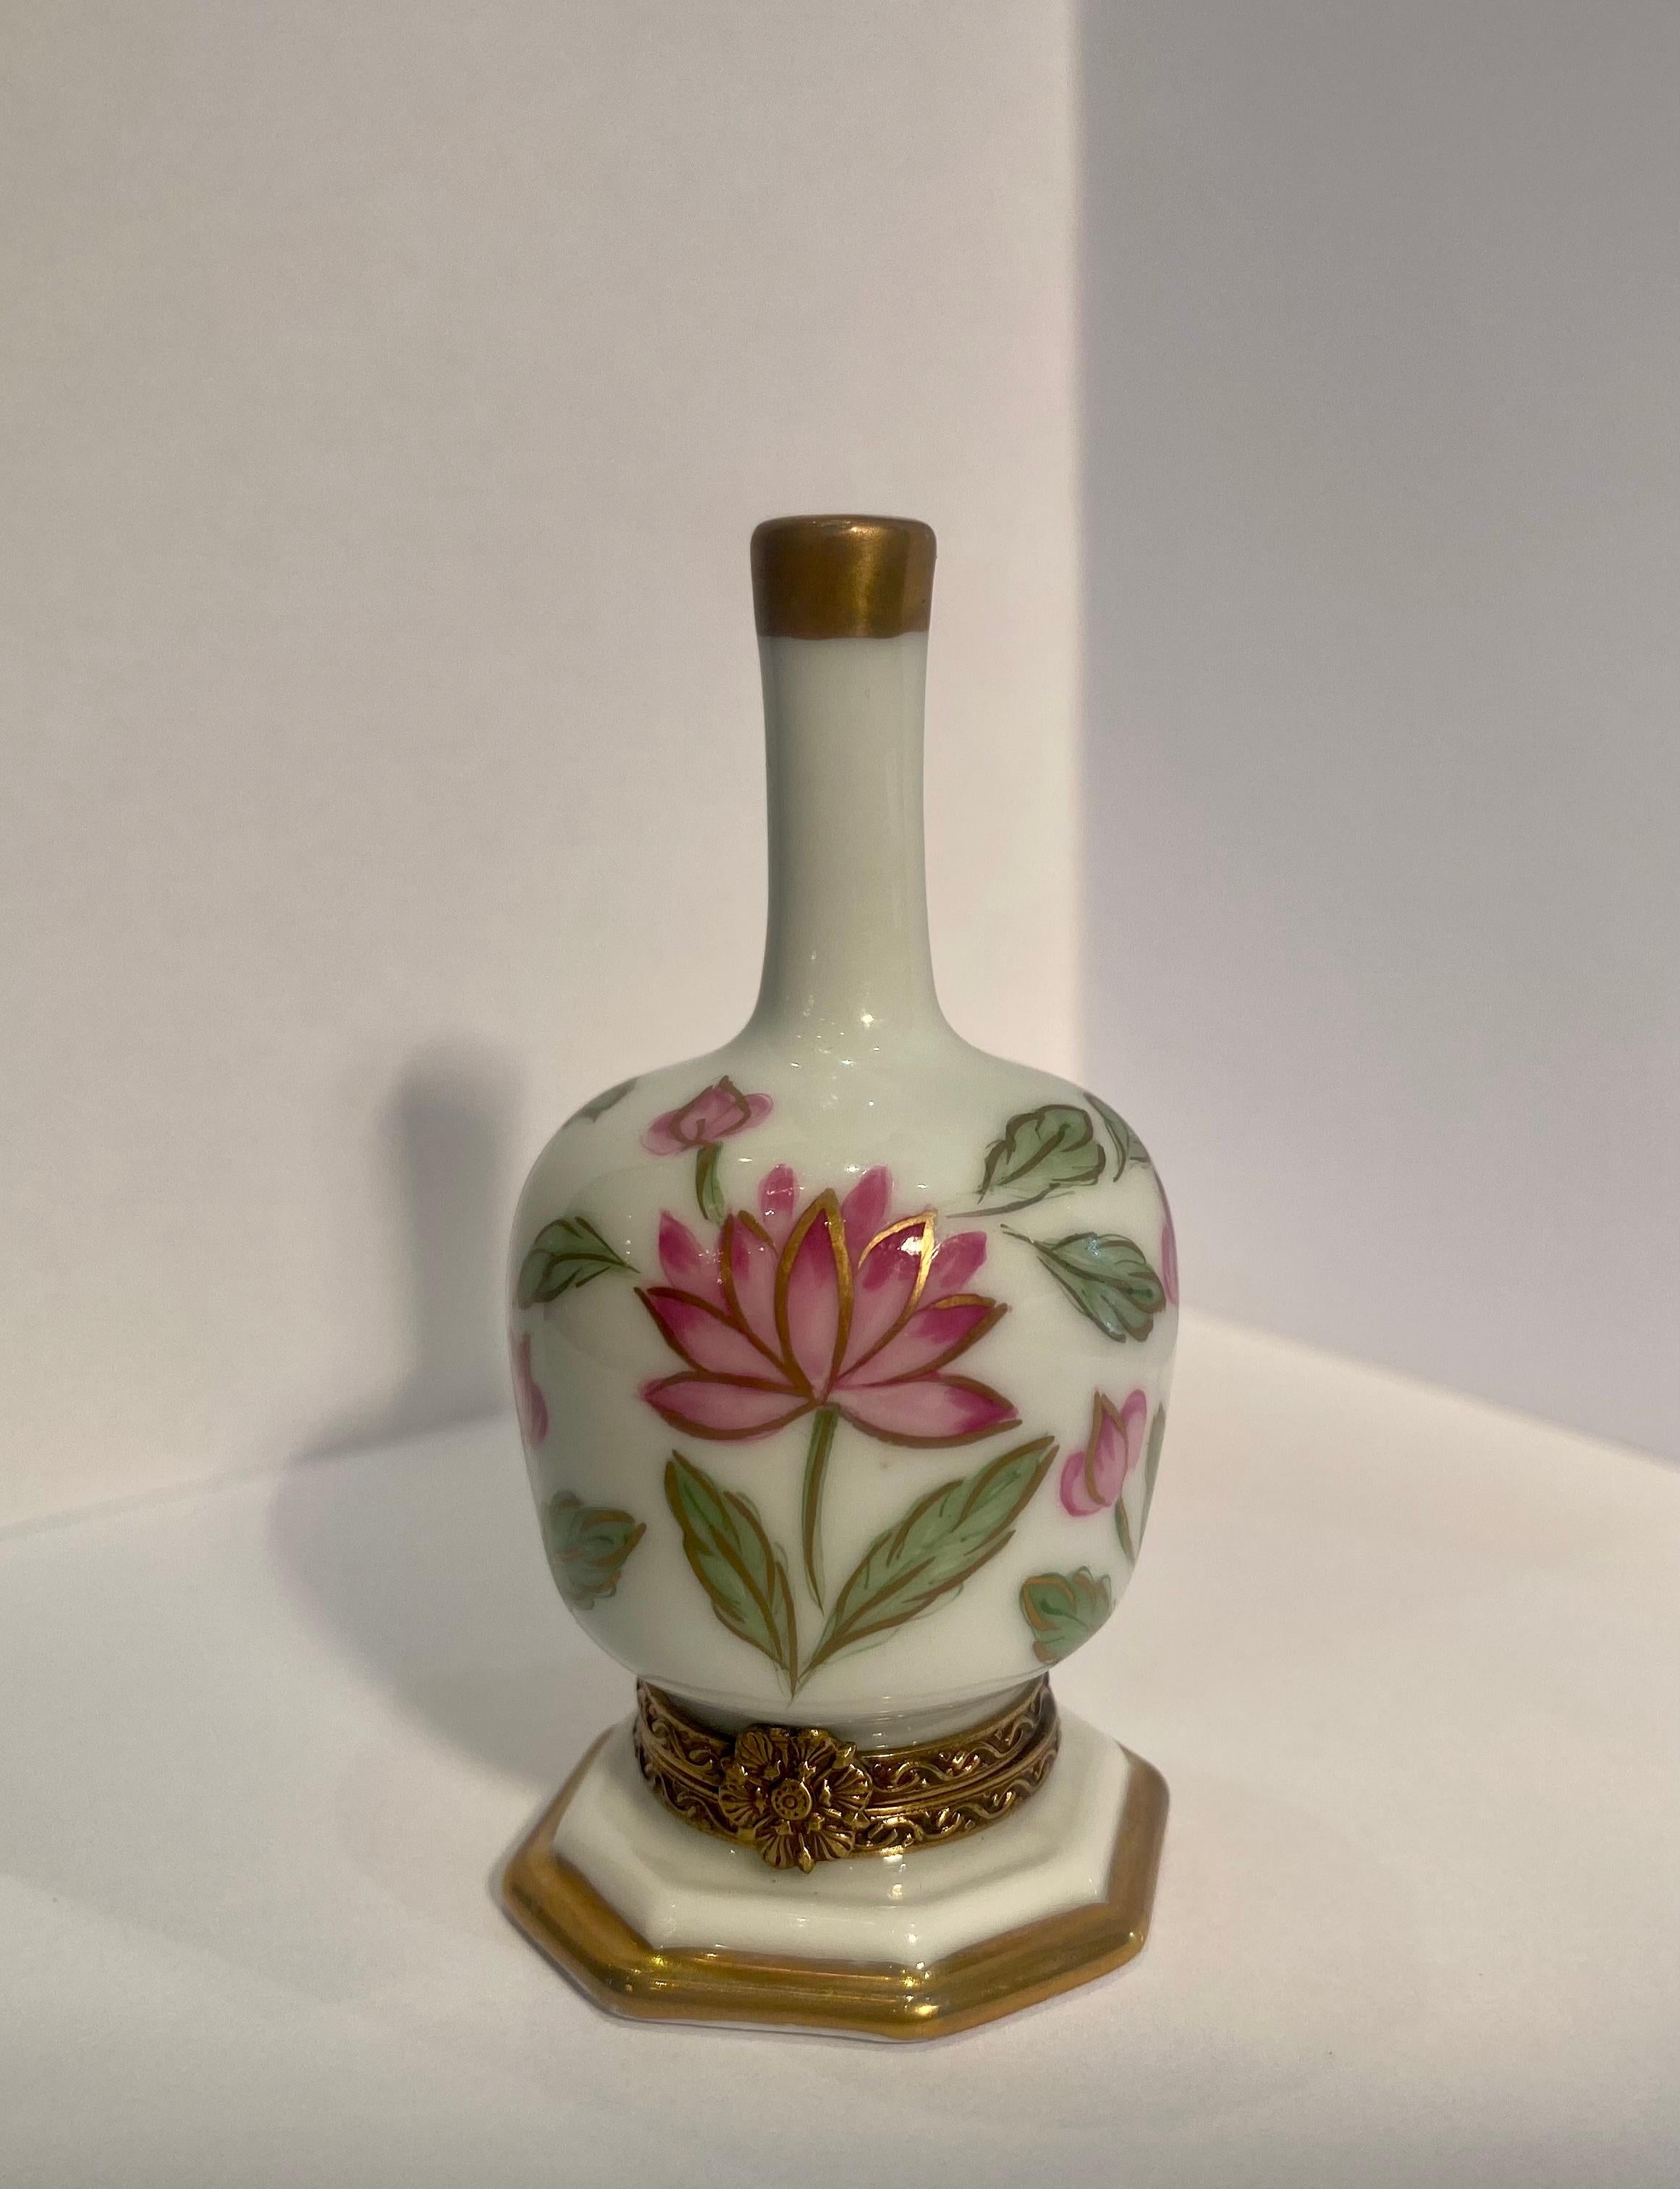 Unique Limoges France Hand Painted Porcelain Vase Trinket Box with Lotus Flowers In Good Condition For Sale In Tustin, CA